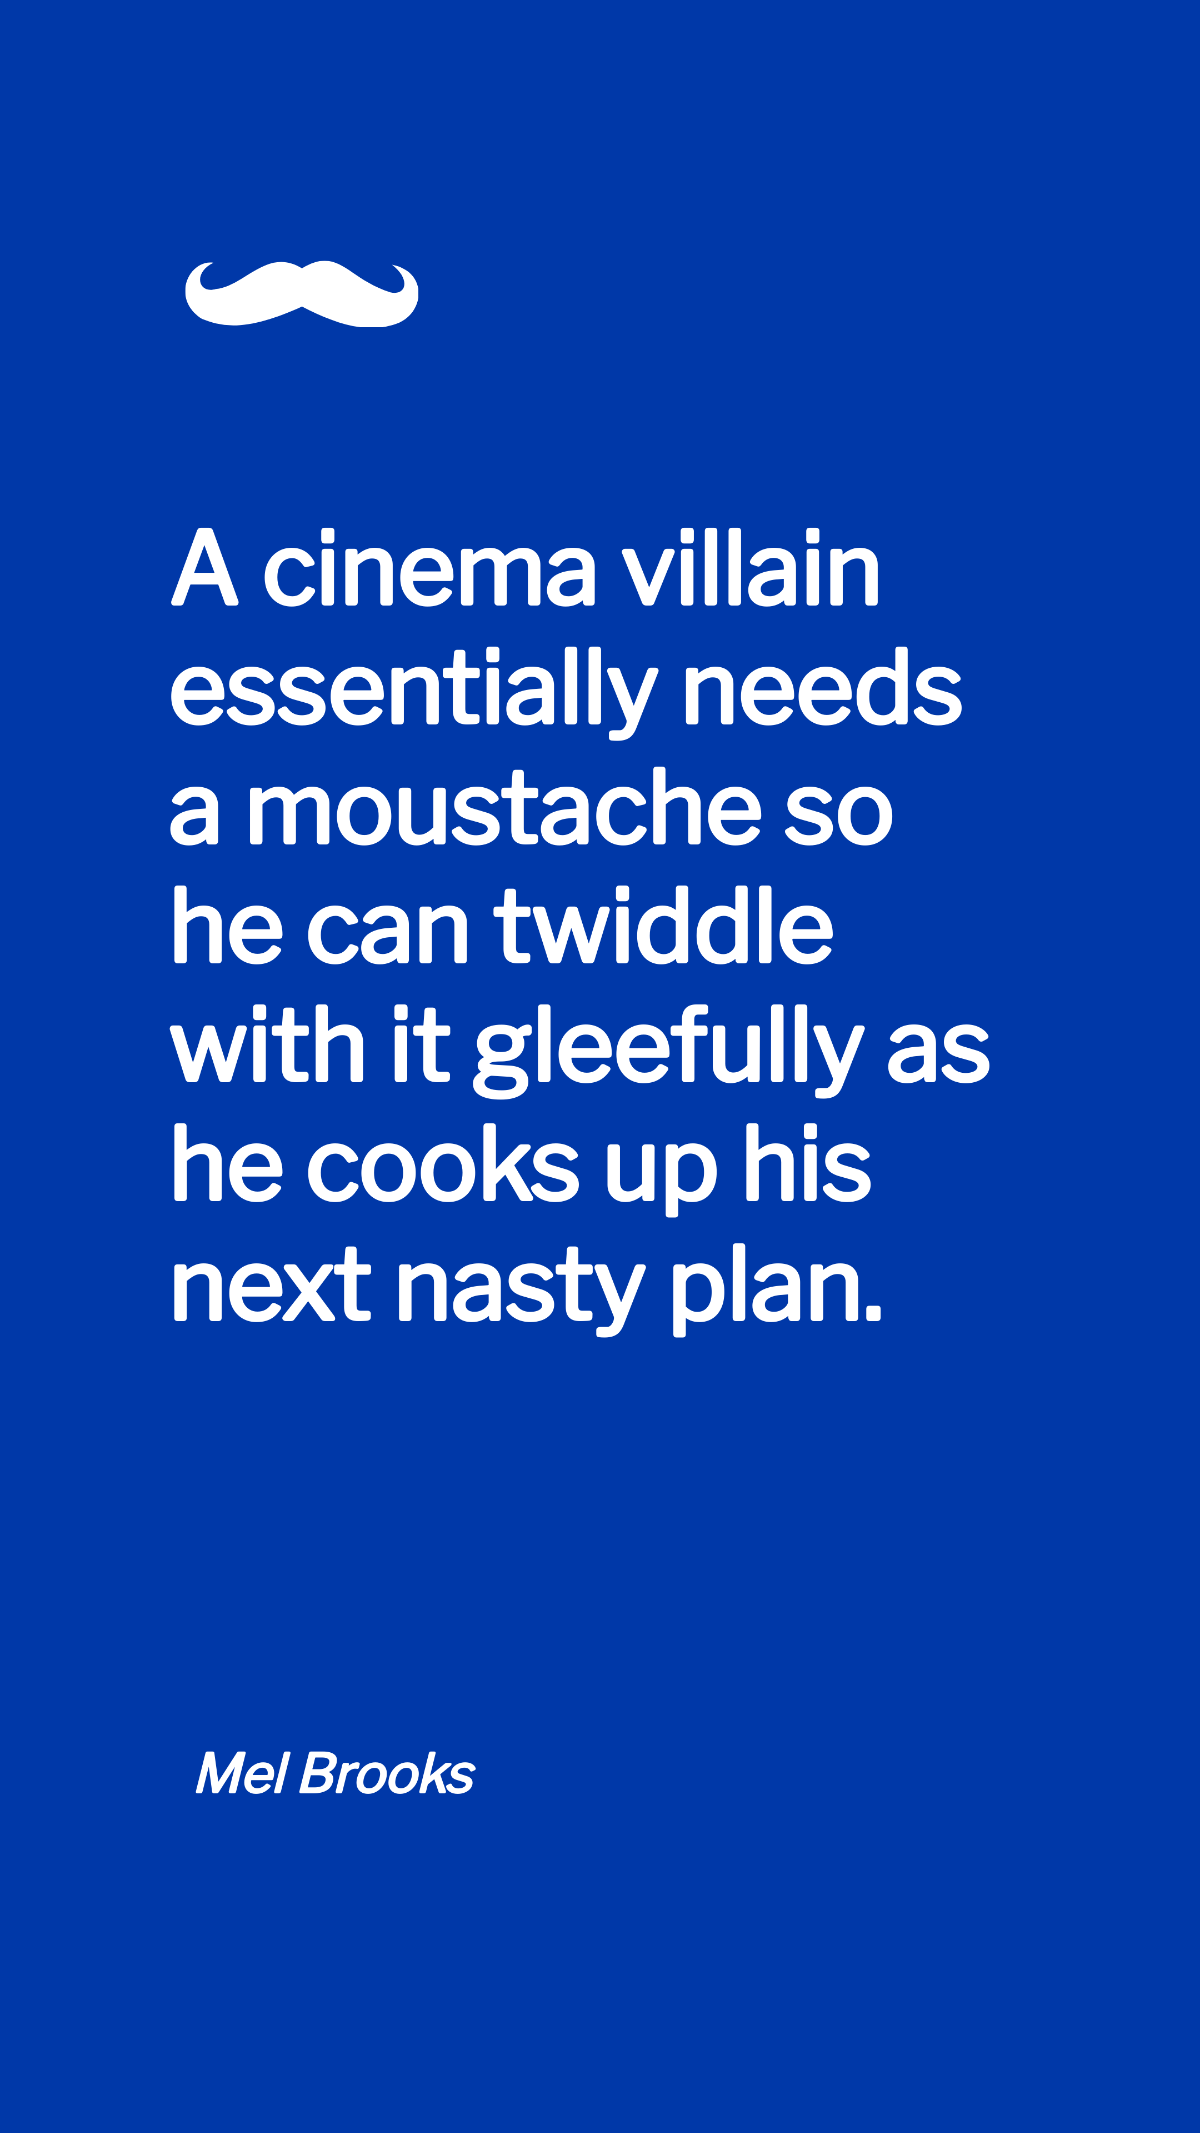 Mel Brooks - A cinema villain essentially needs a moustache so he can twiddle with it gleefully as he cooks up his next nasty plan.